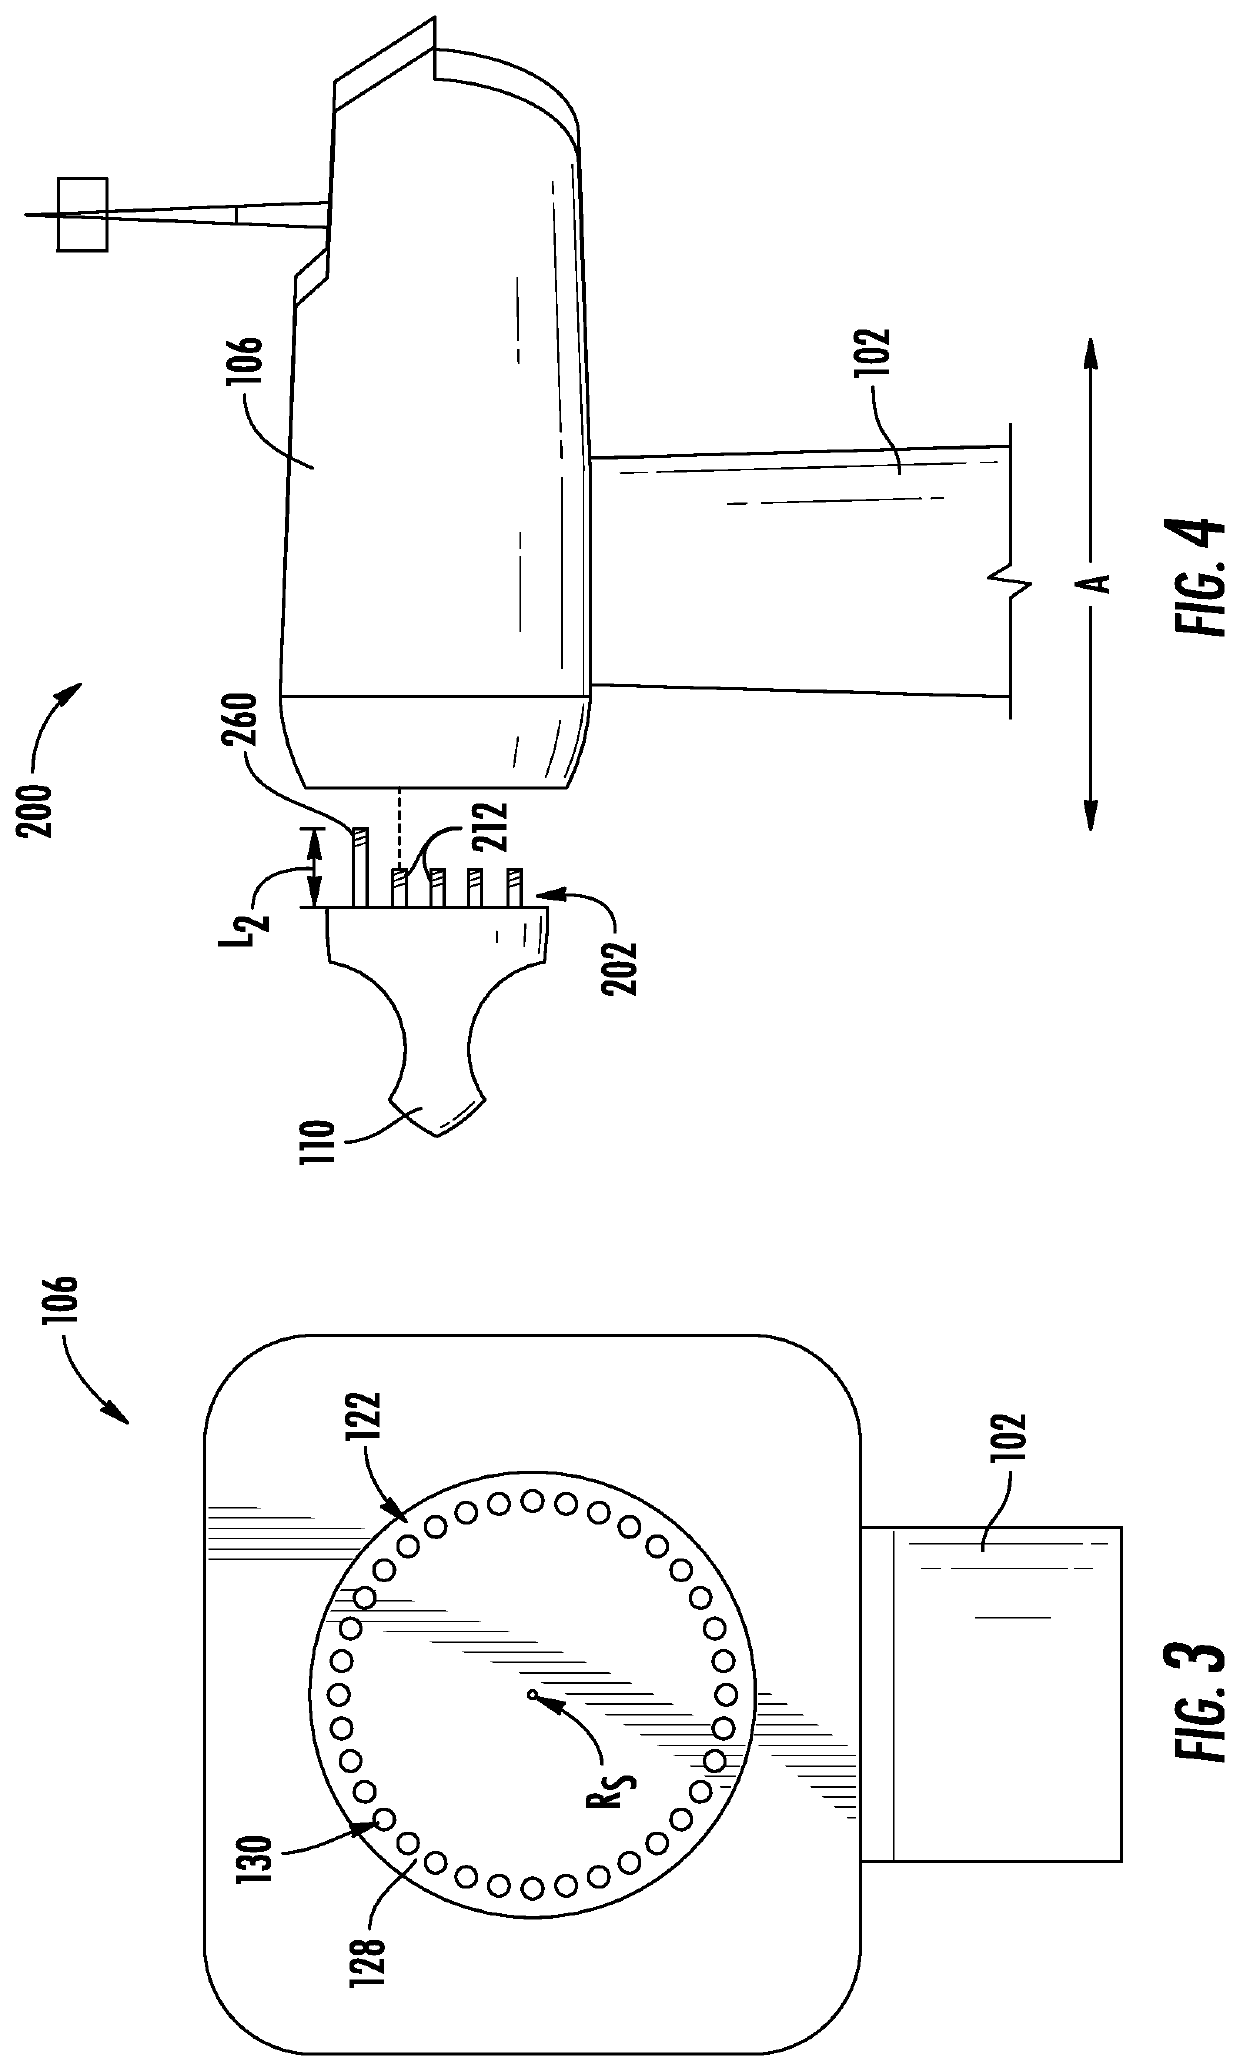 System and method for coupling a hub to a main shaft of a wind turbine